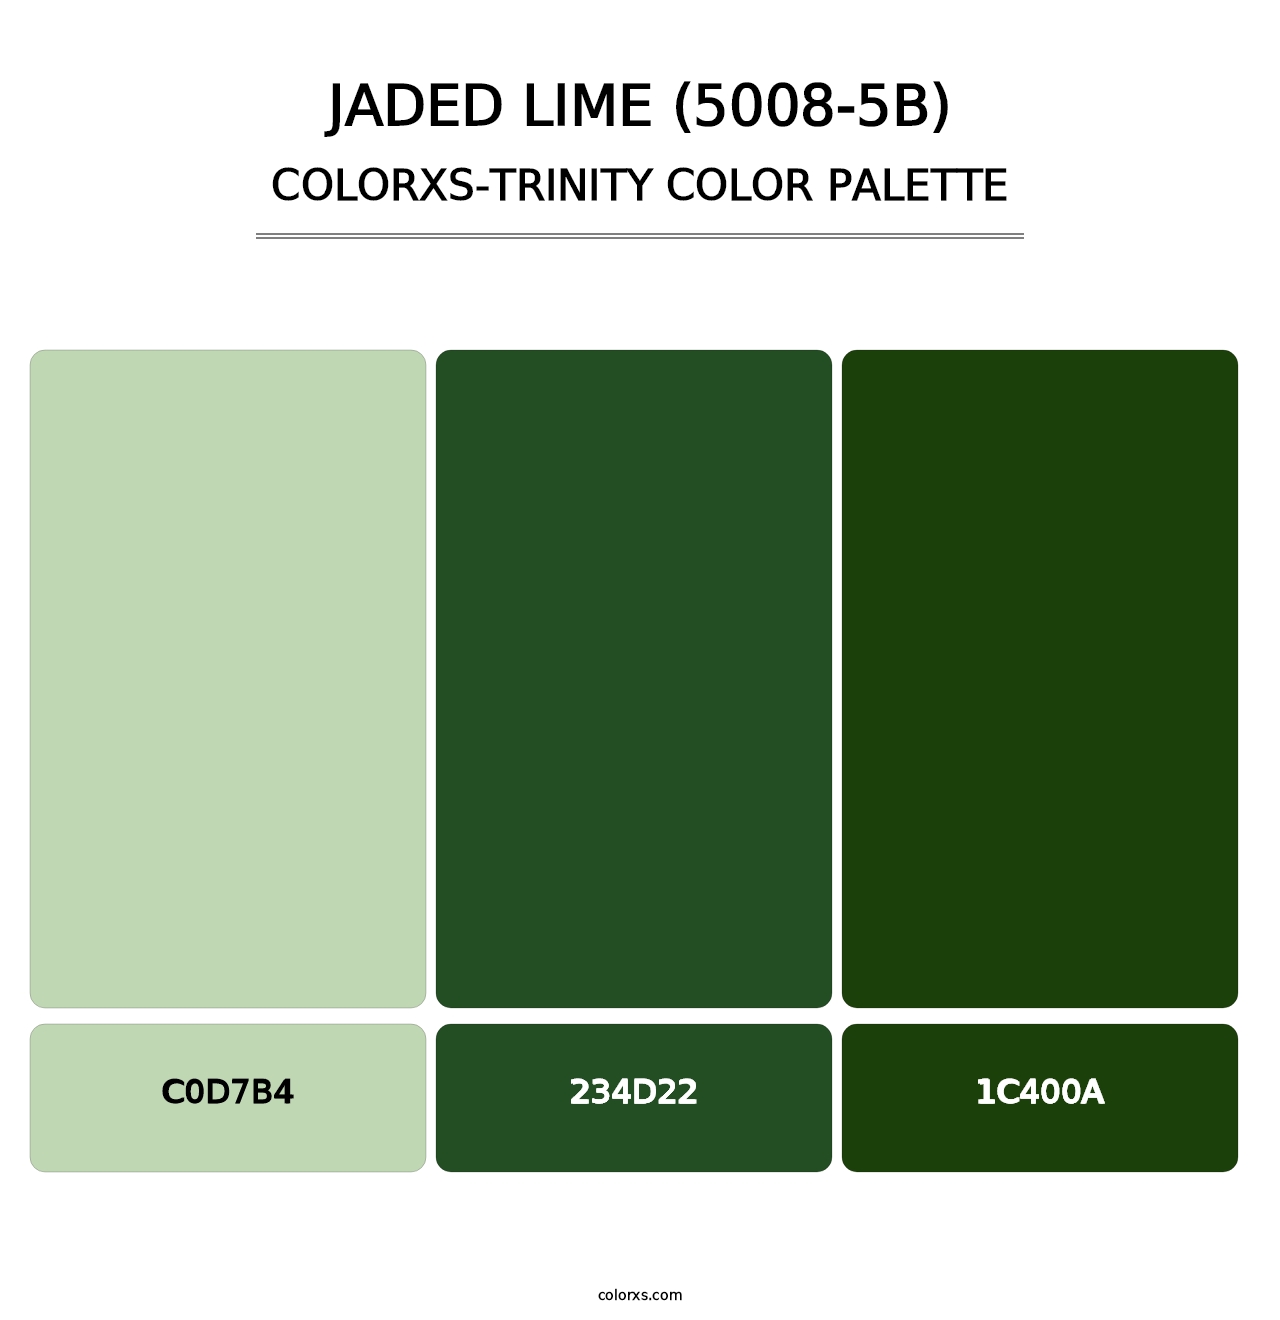 Jaded Lime (5008-5B) - Colorxs Trinity Palette